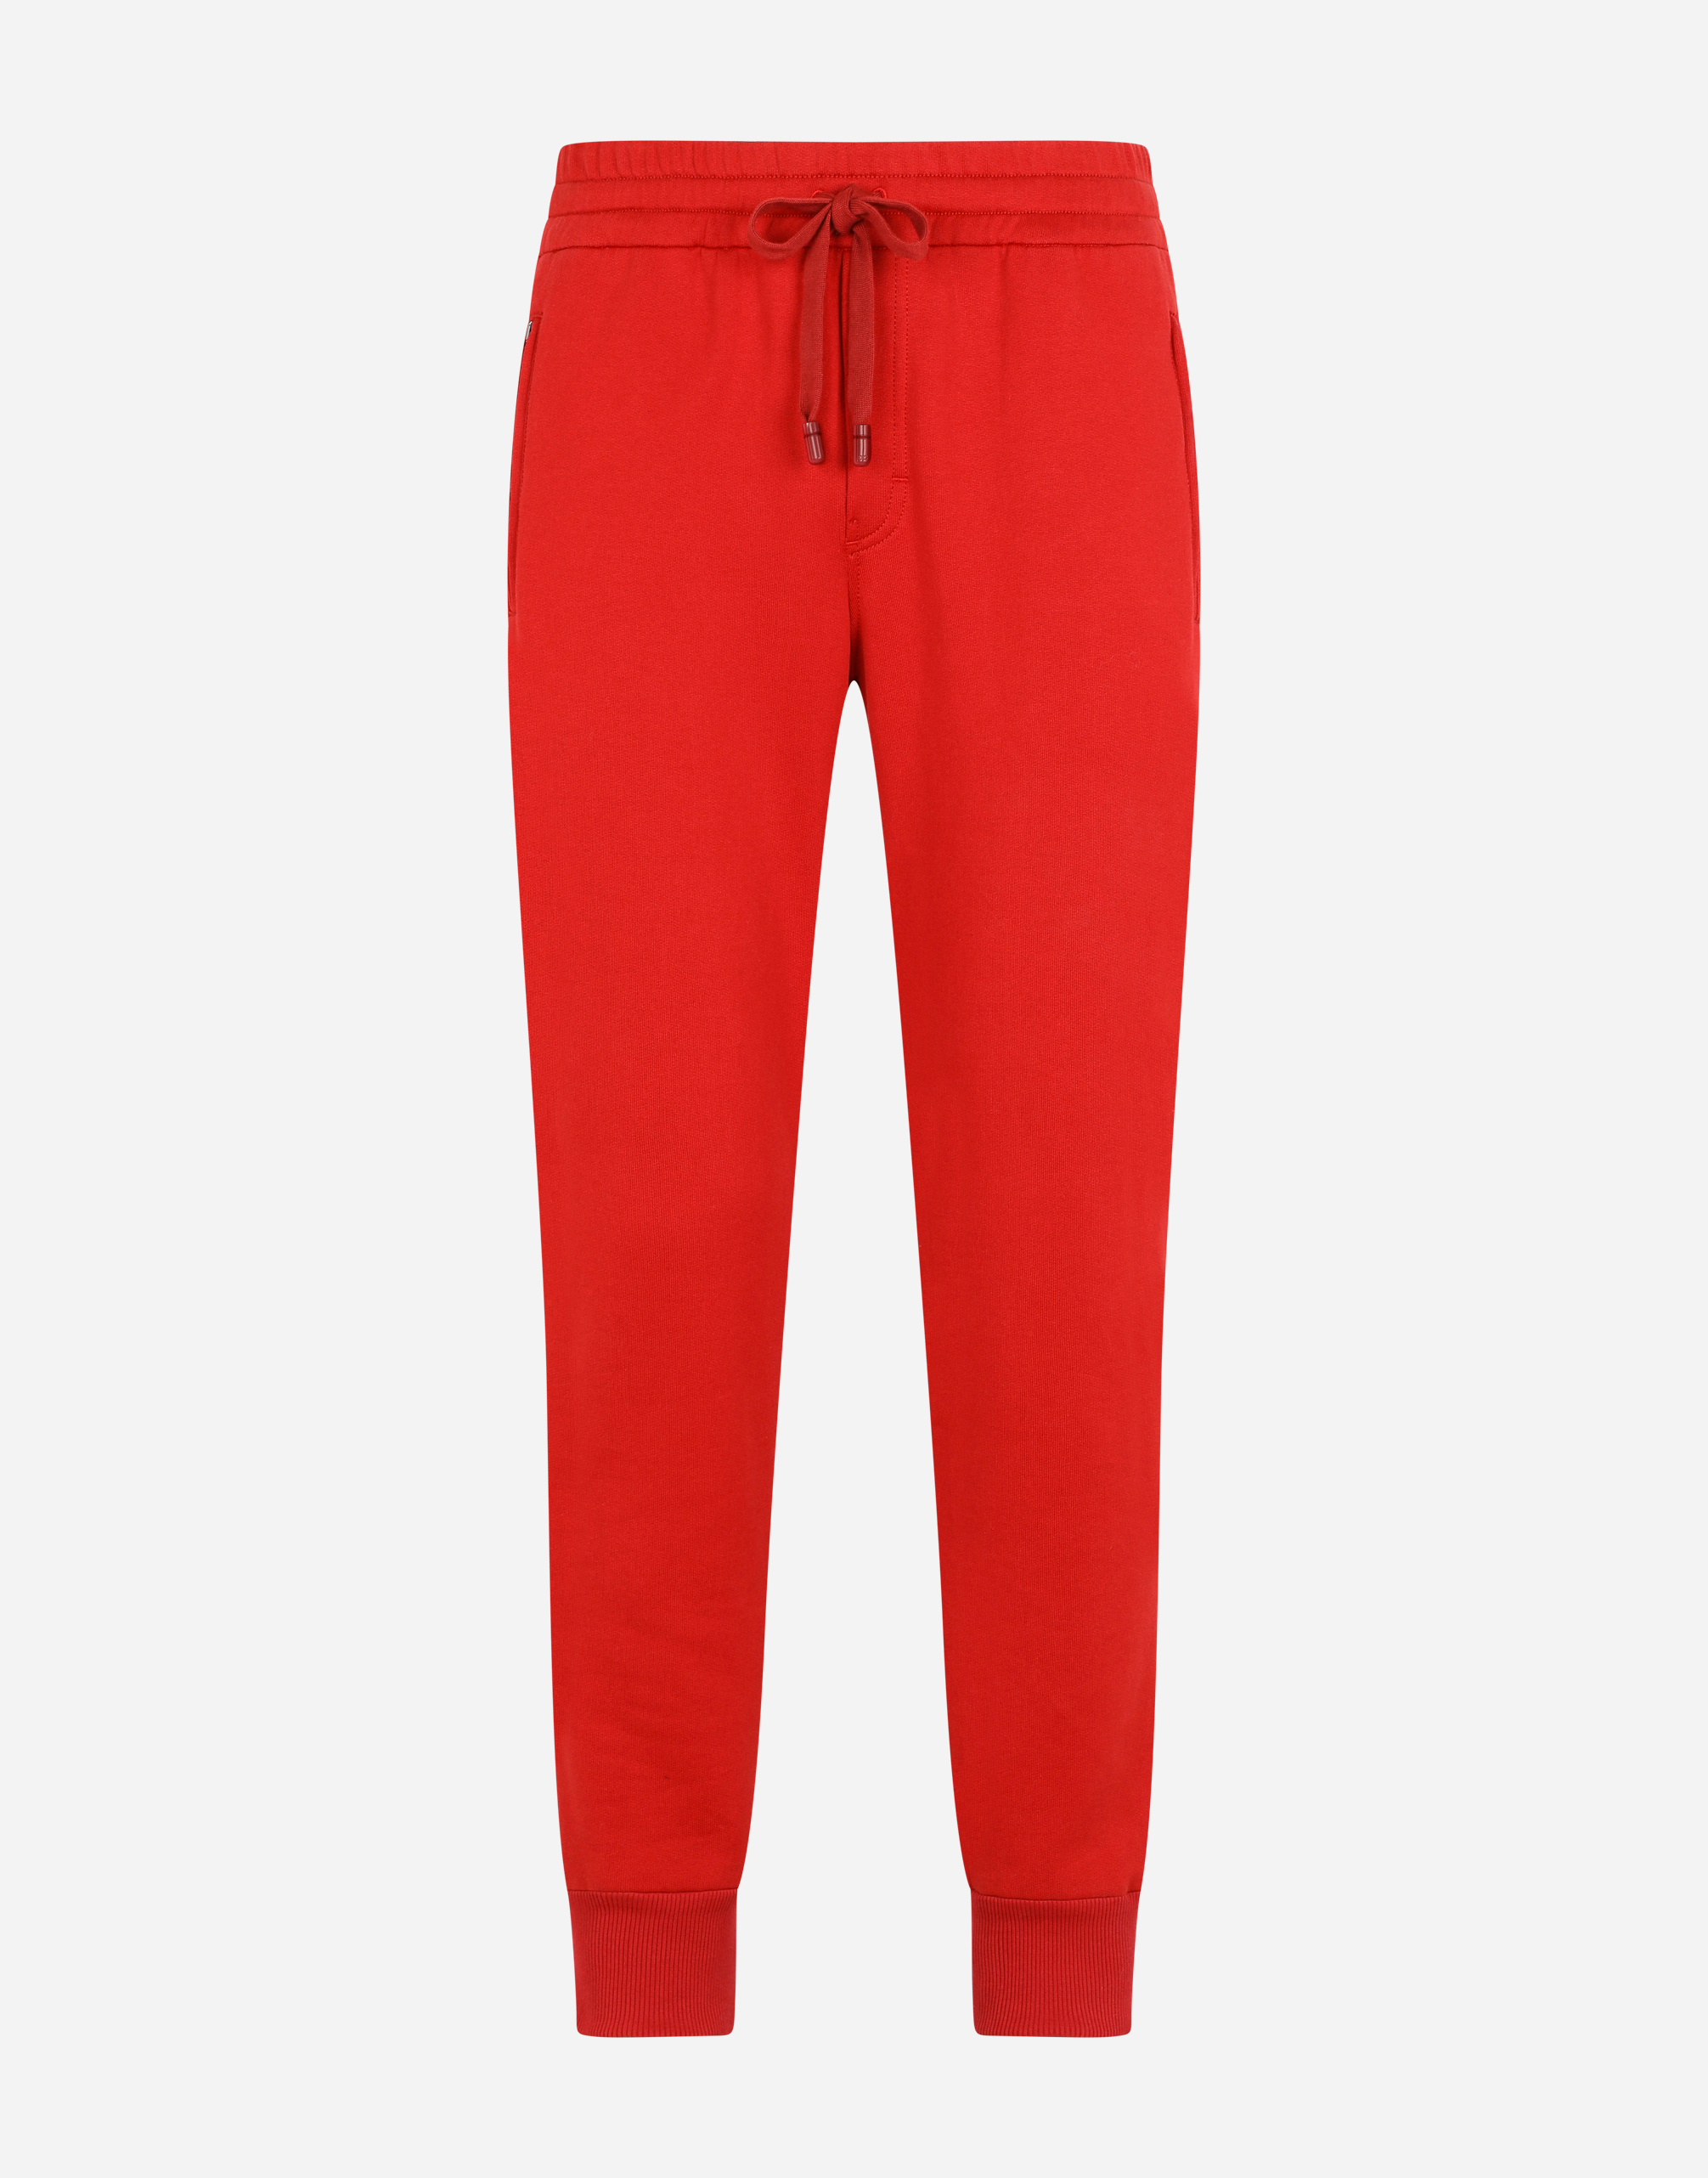 Jersey jogging pants with branded plate in Red